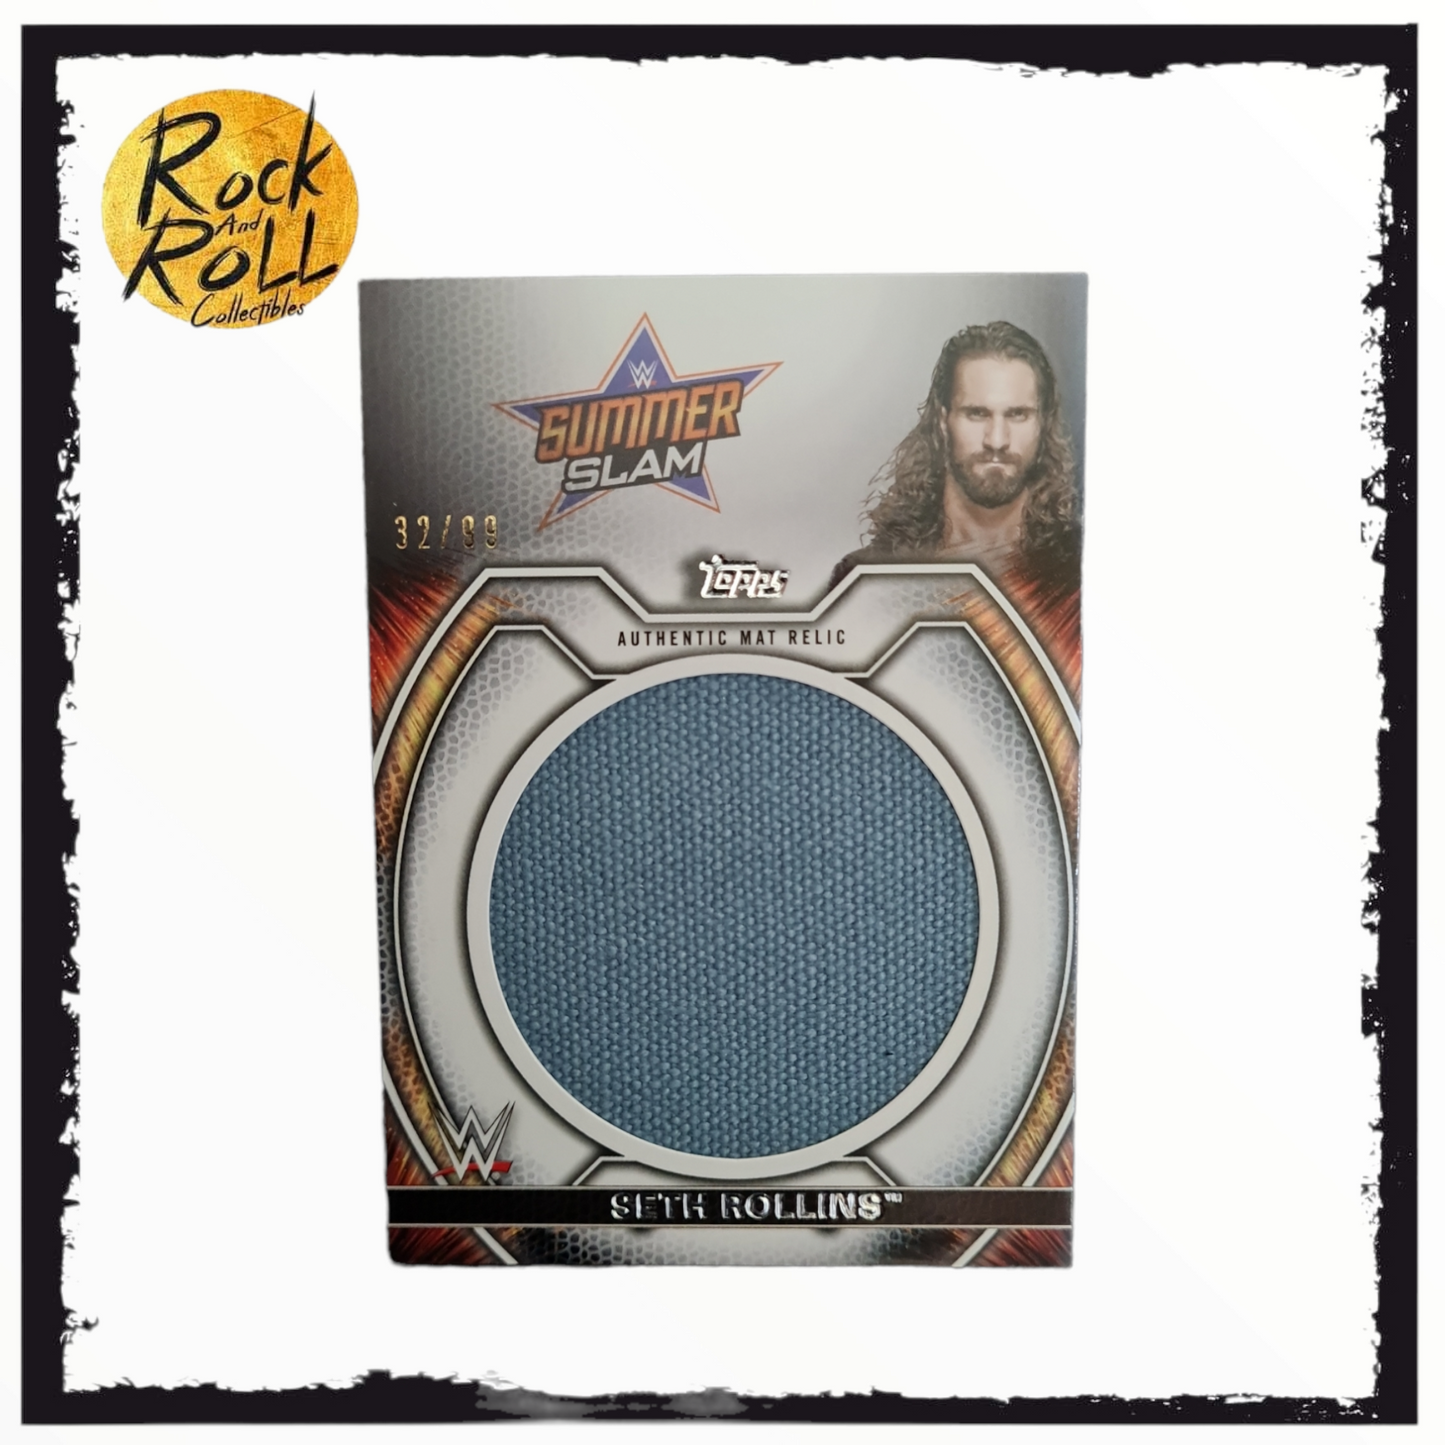 2021 Topps WWE Undisputed Authentic Mat Relic Seth Rollins Summer Slam #32/99 M-SE